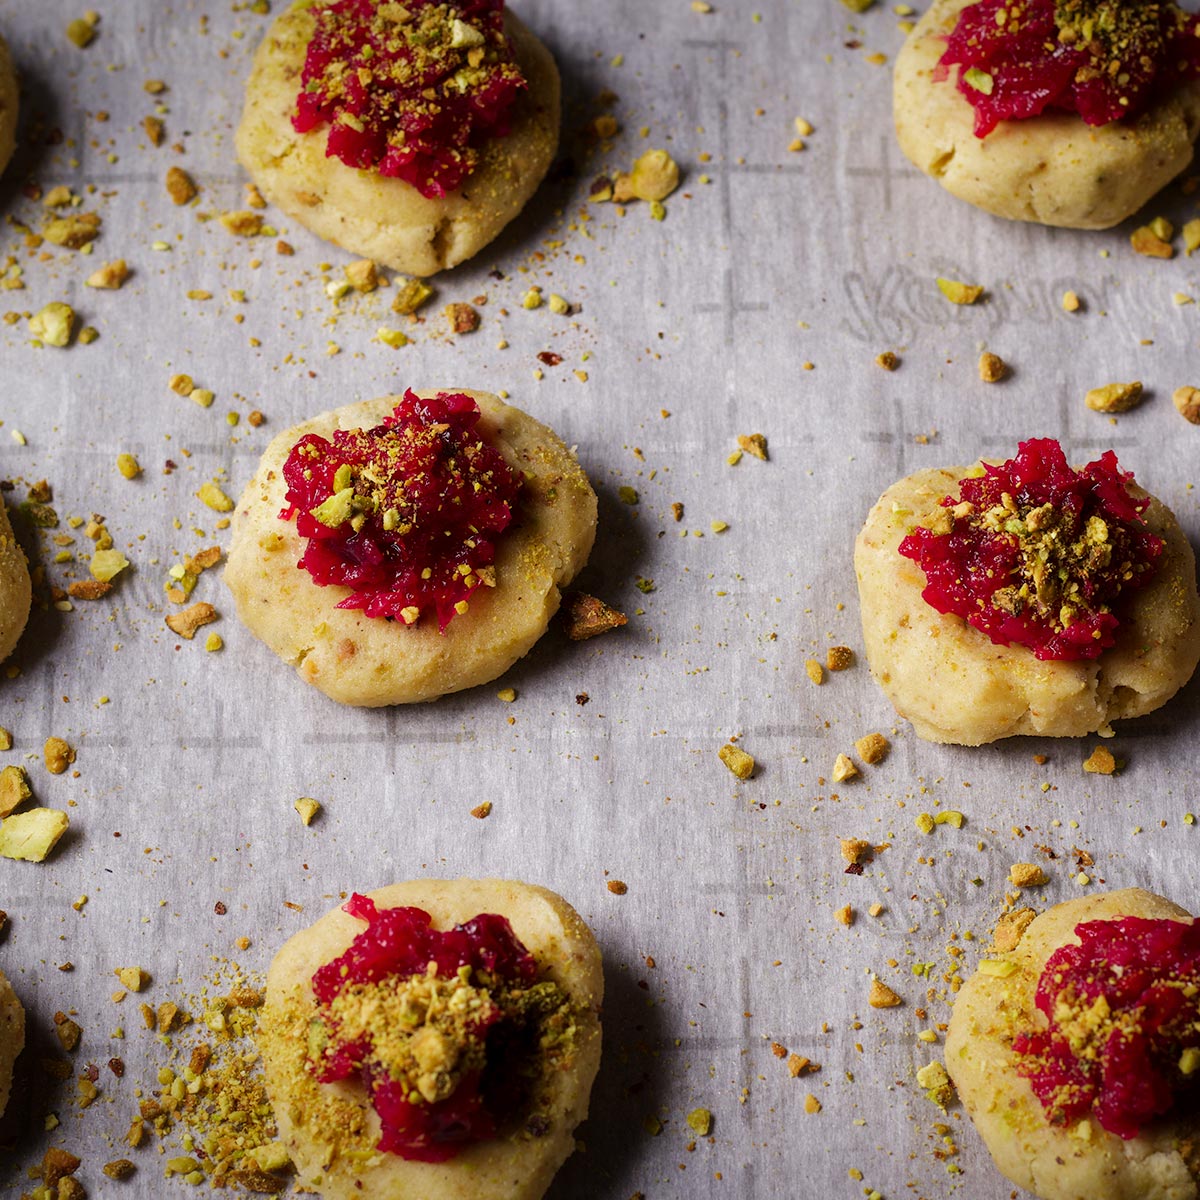 Pistachio cranberry cookies on a baking tray lined with parchment paper.